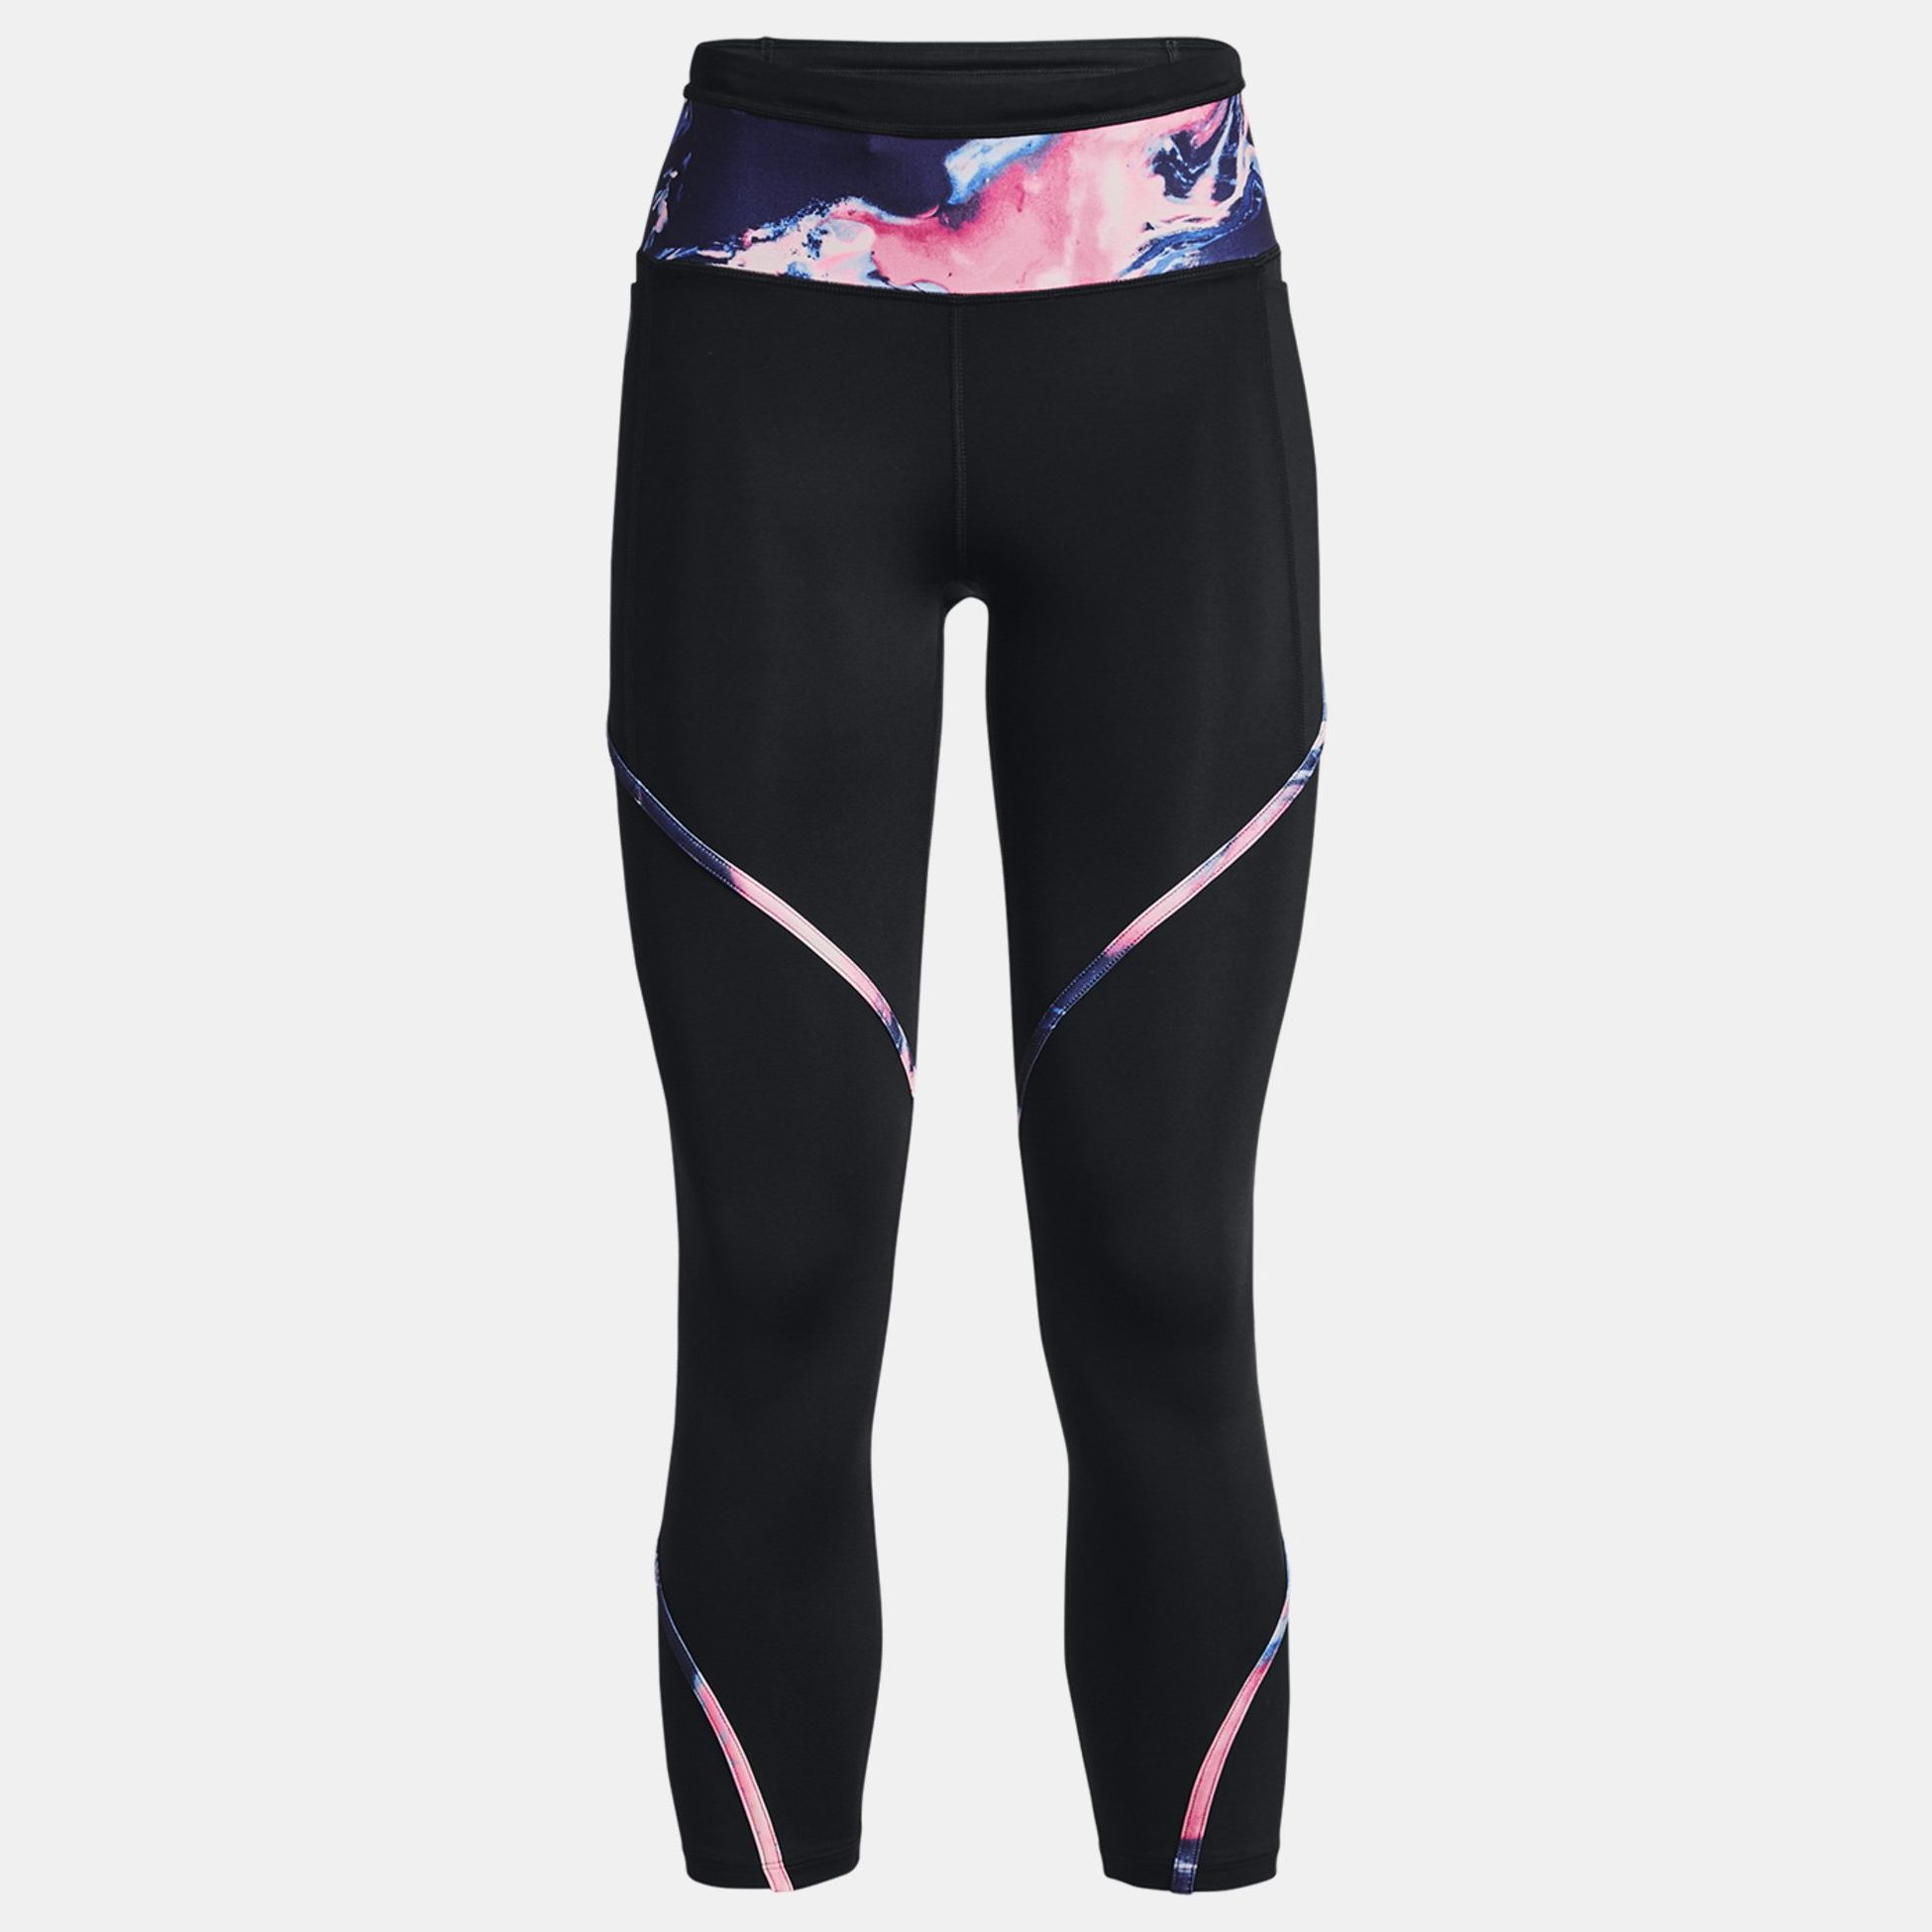 https://img1.sportconcept.com/backend_nou/content/images/fitness-under-armour%20ua-run-anywhere-tights-20220913181406.jpg